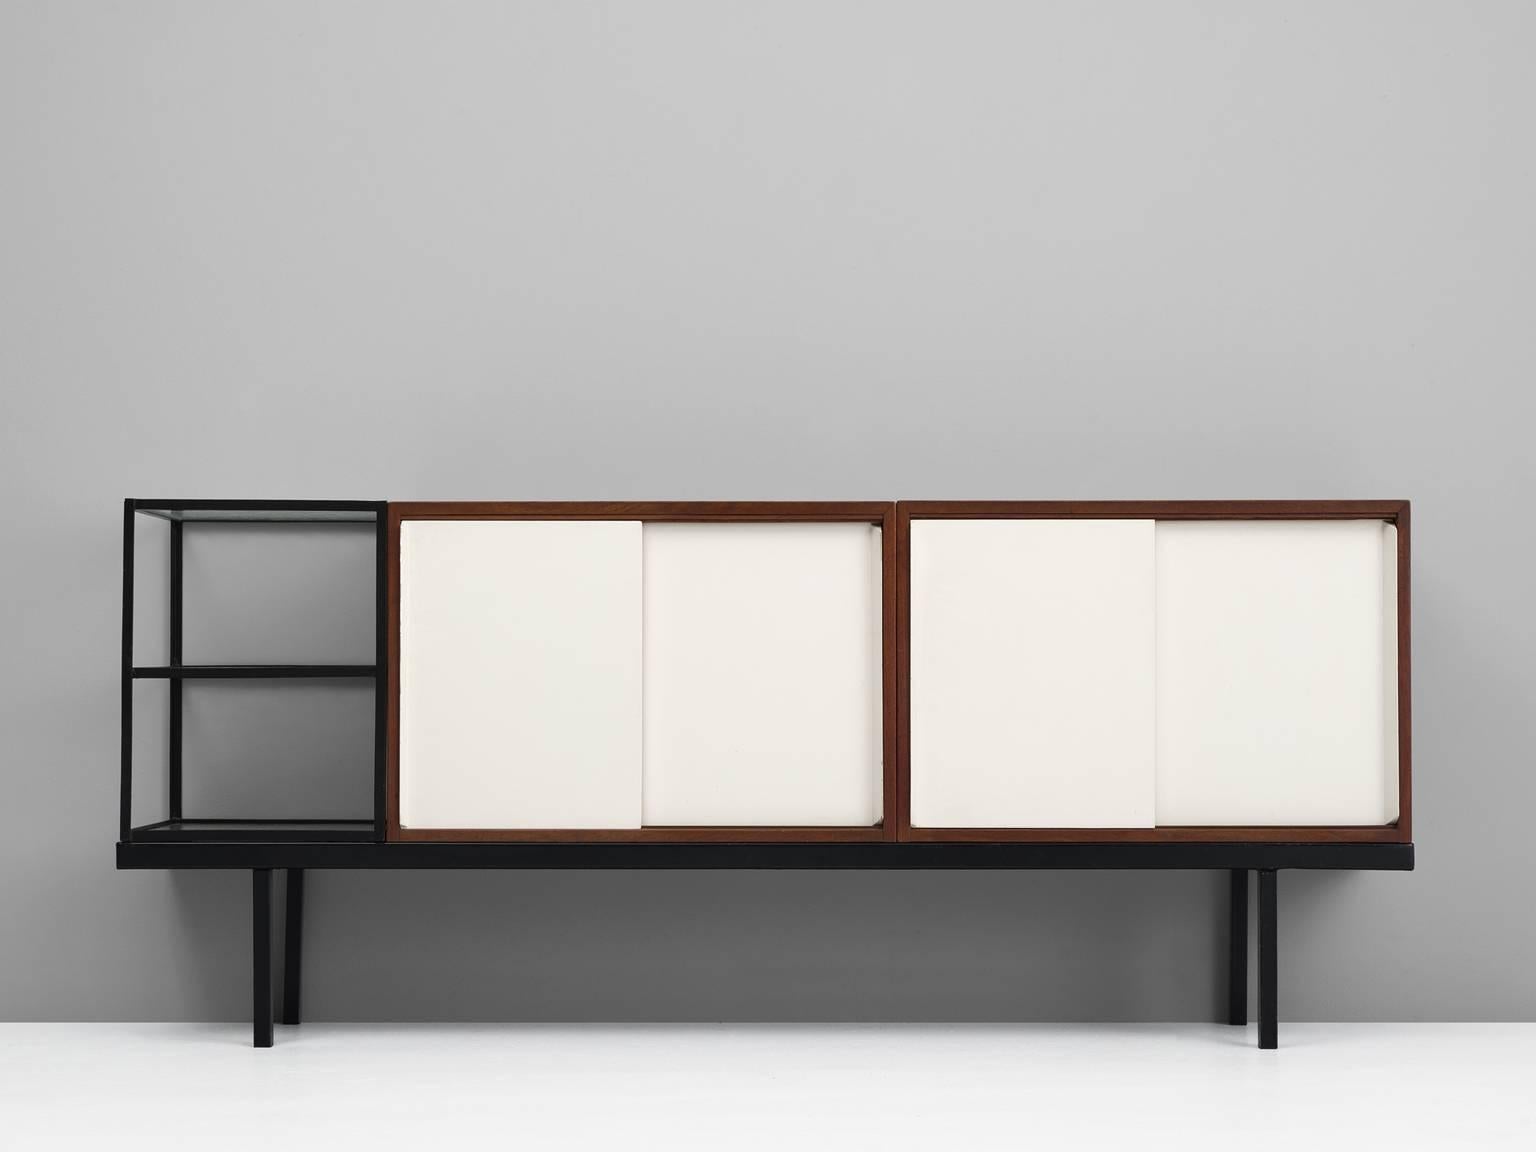 Credenza model KW63/Bornholm, in teakwood, metal and glass, by Martin Visser for 't Spectrum, circa 1956. 

Modern sideboard in mixed materials. This sofa has a metal base and three storage parts. These parts are modular and can be placed freely